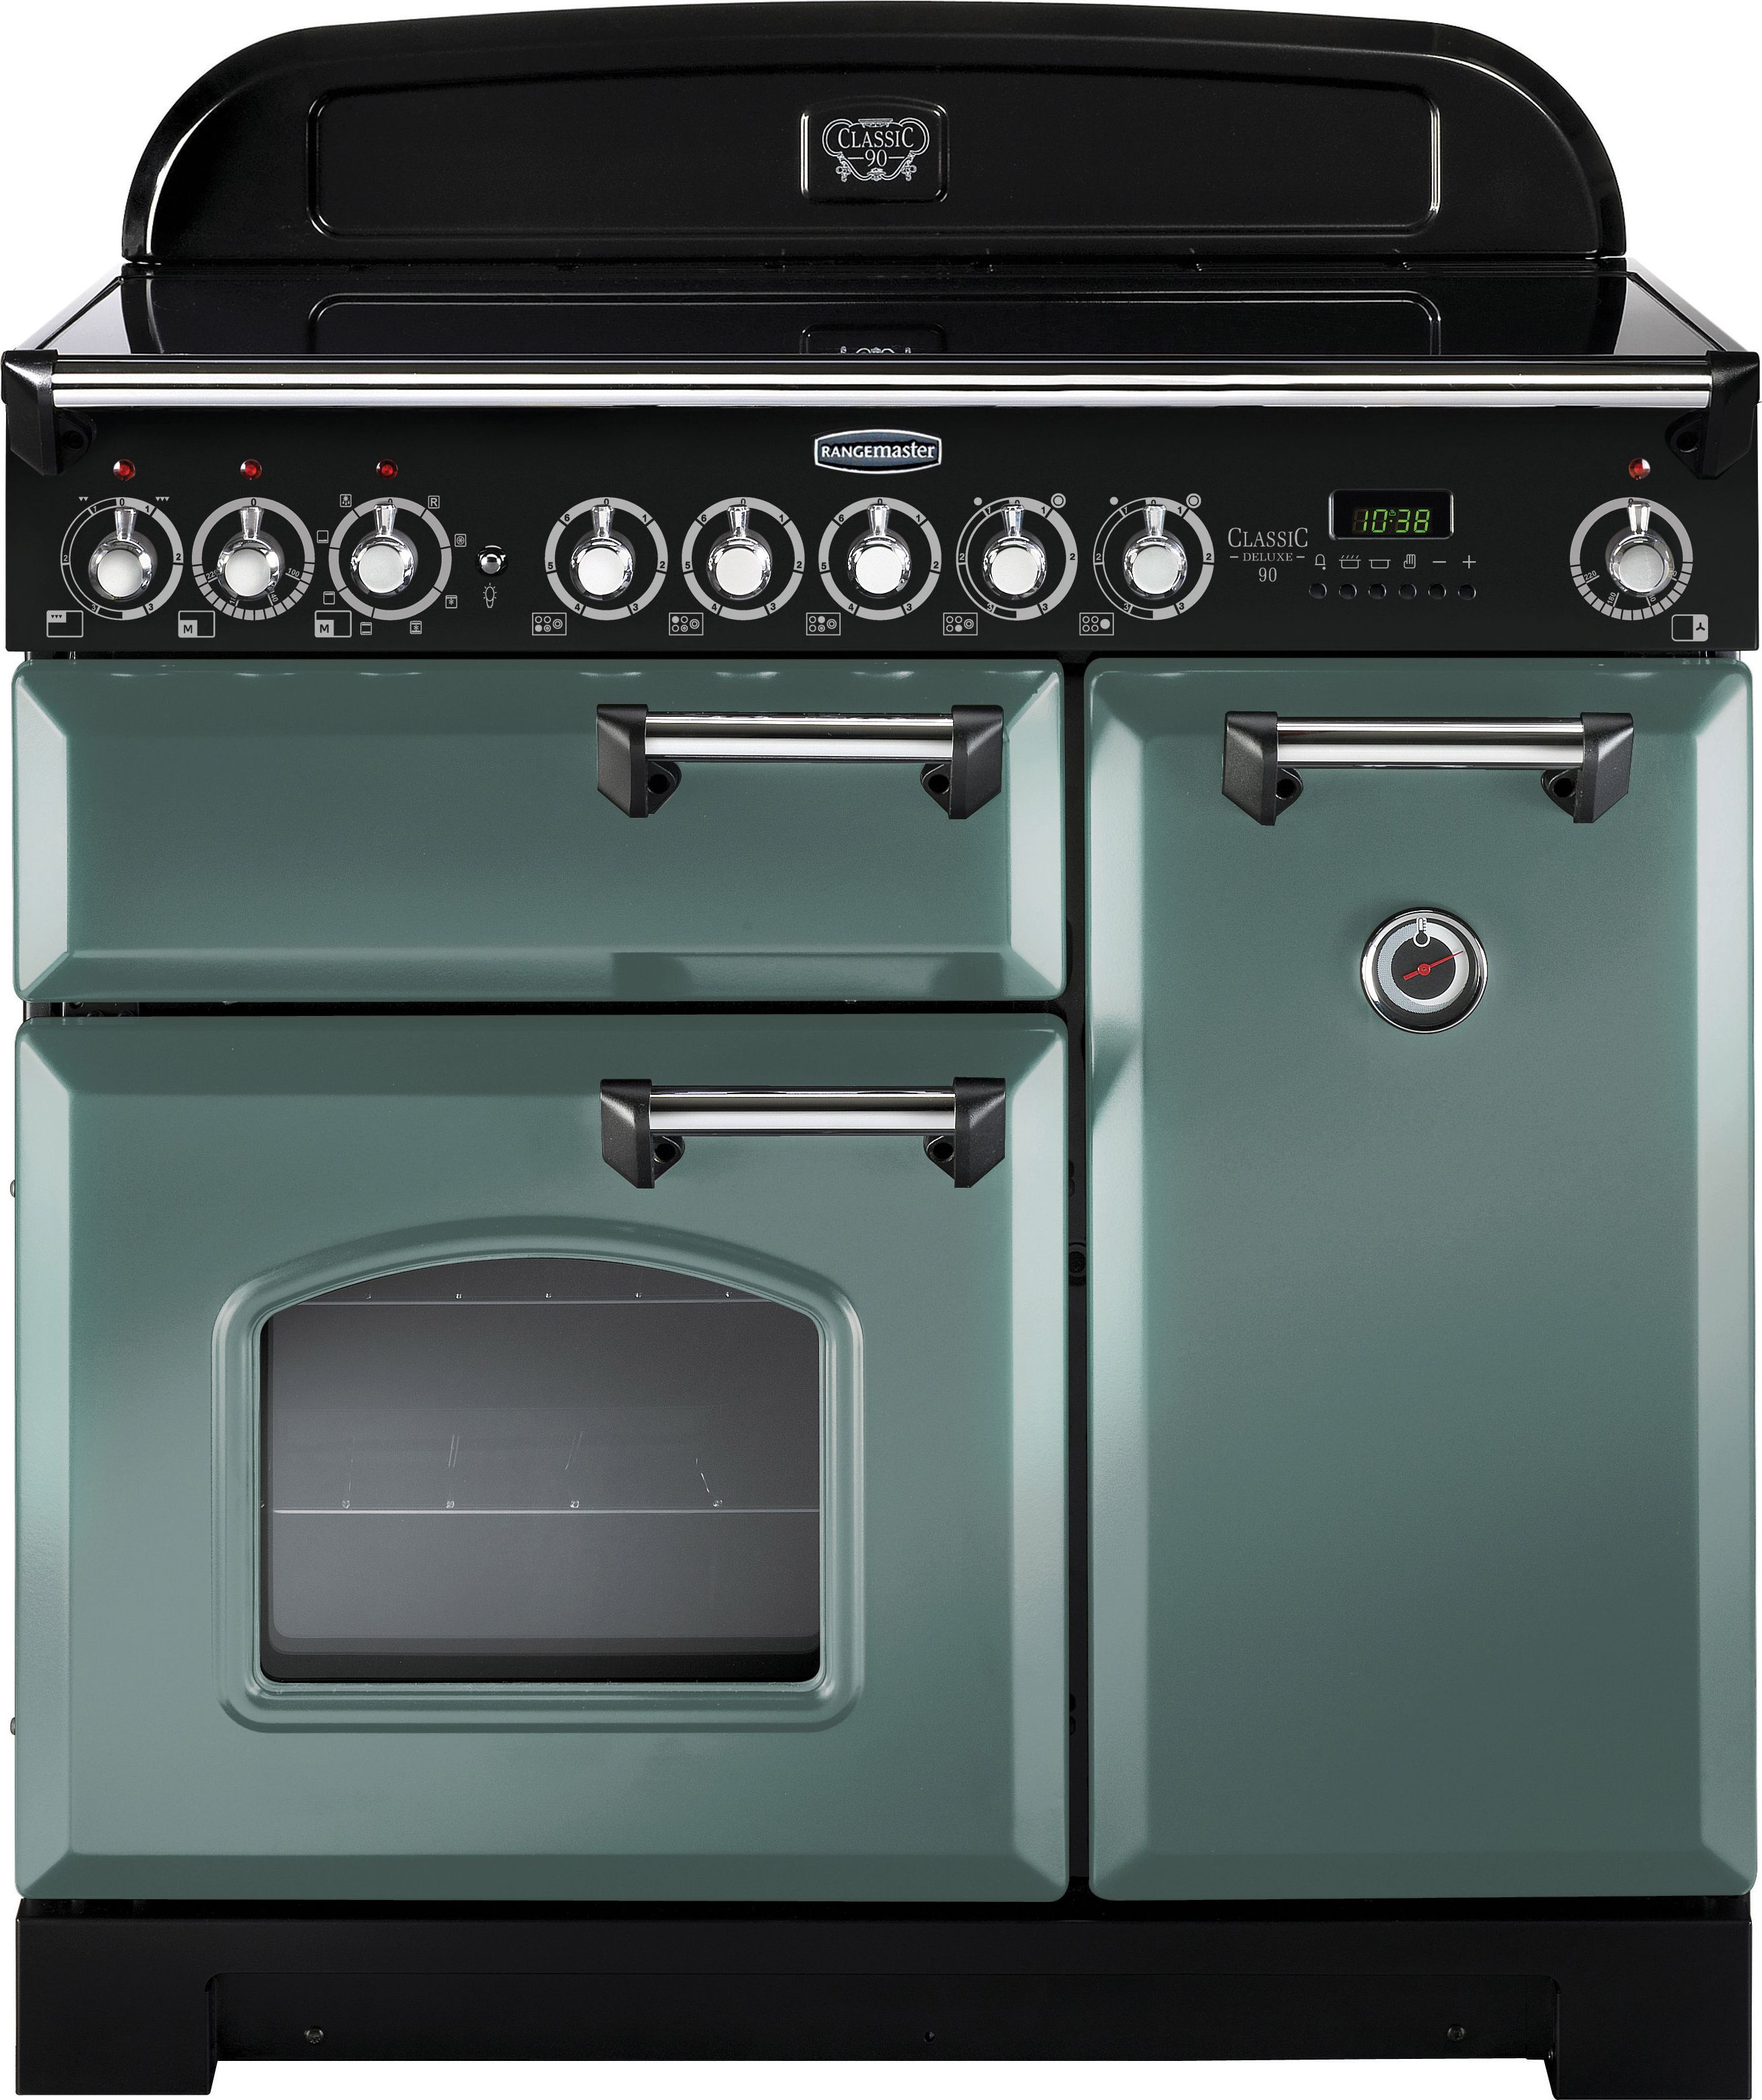 Rangemaster Classic Deluxe CDL90ECMG/C 90cm Electric Range Cooker with Ceramic Hob - Mineral Green / Chrome - A/A Rated, Green